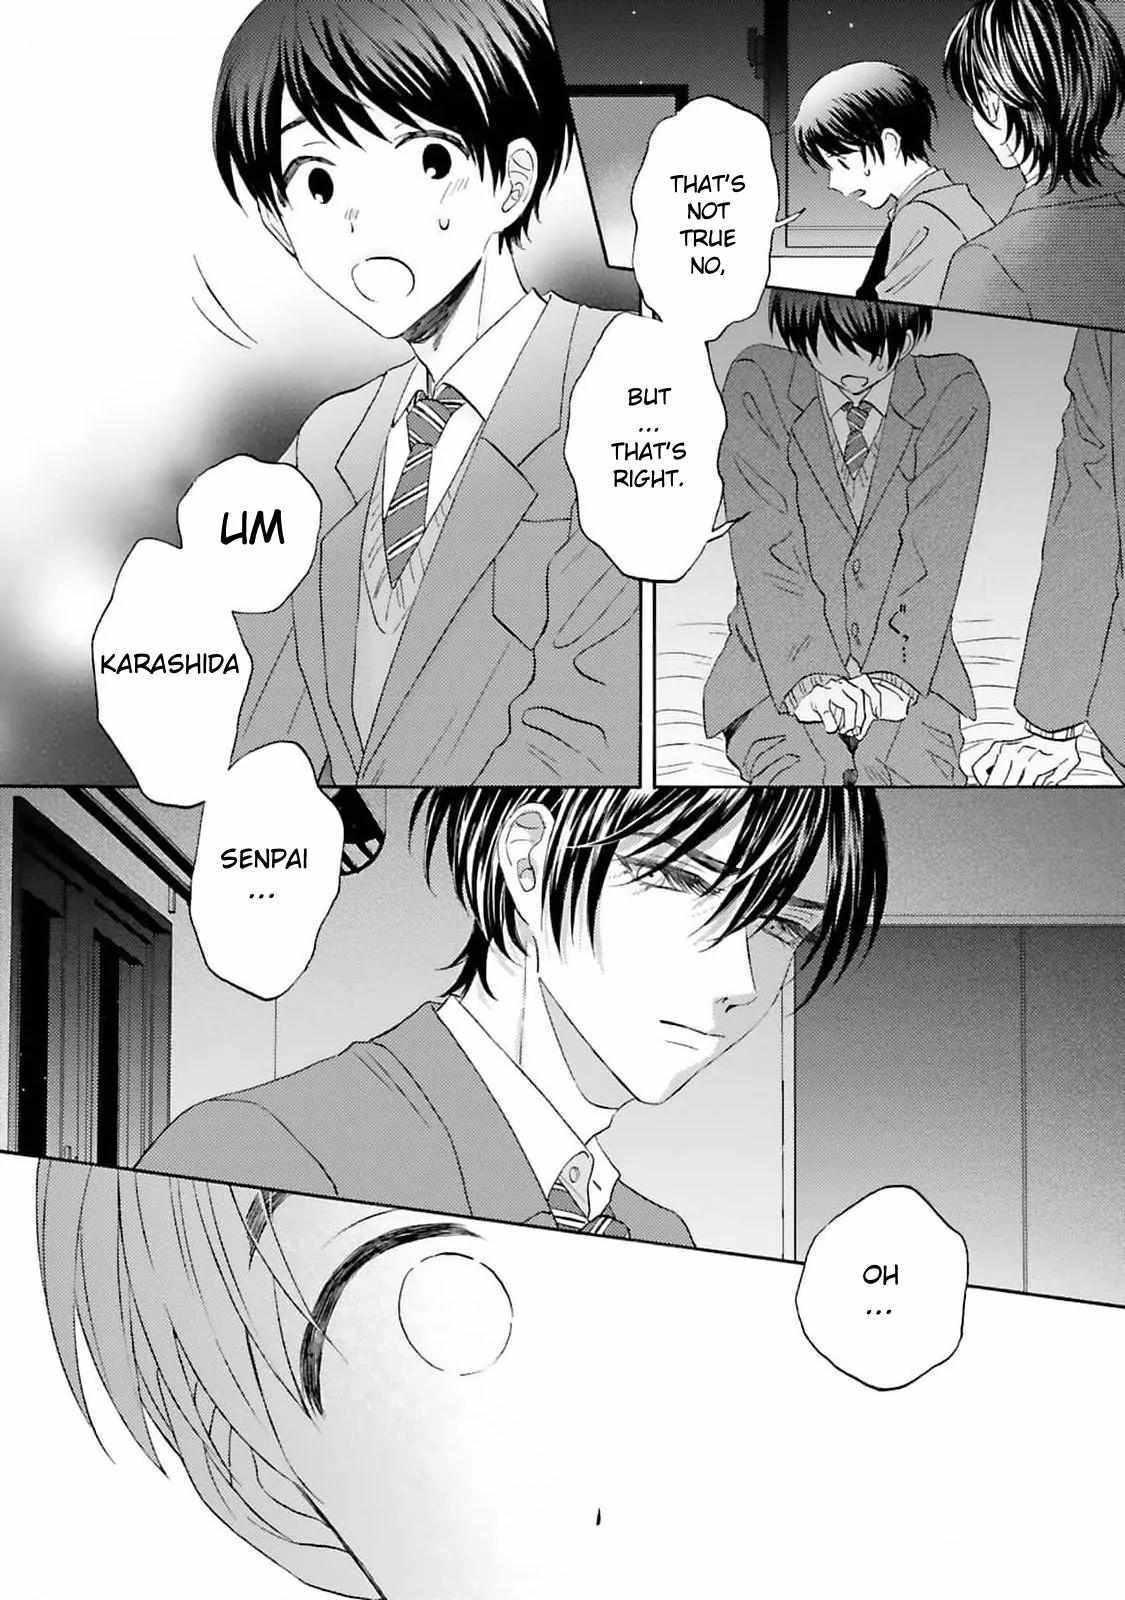 My Cutie Pie -An Ordinary Boy And His Gorgeous Childhood Friend- 〘Official〙 - chapter 8 - #6